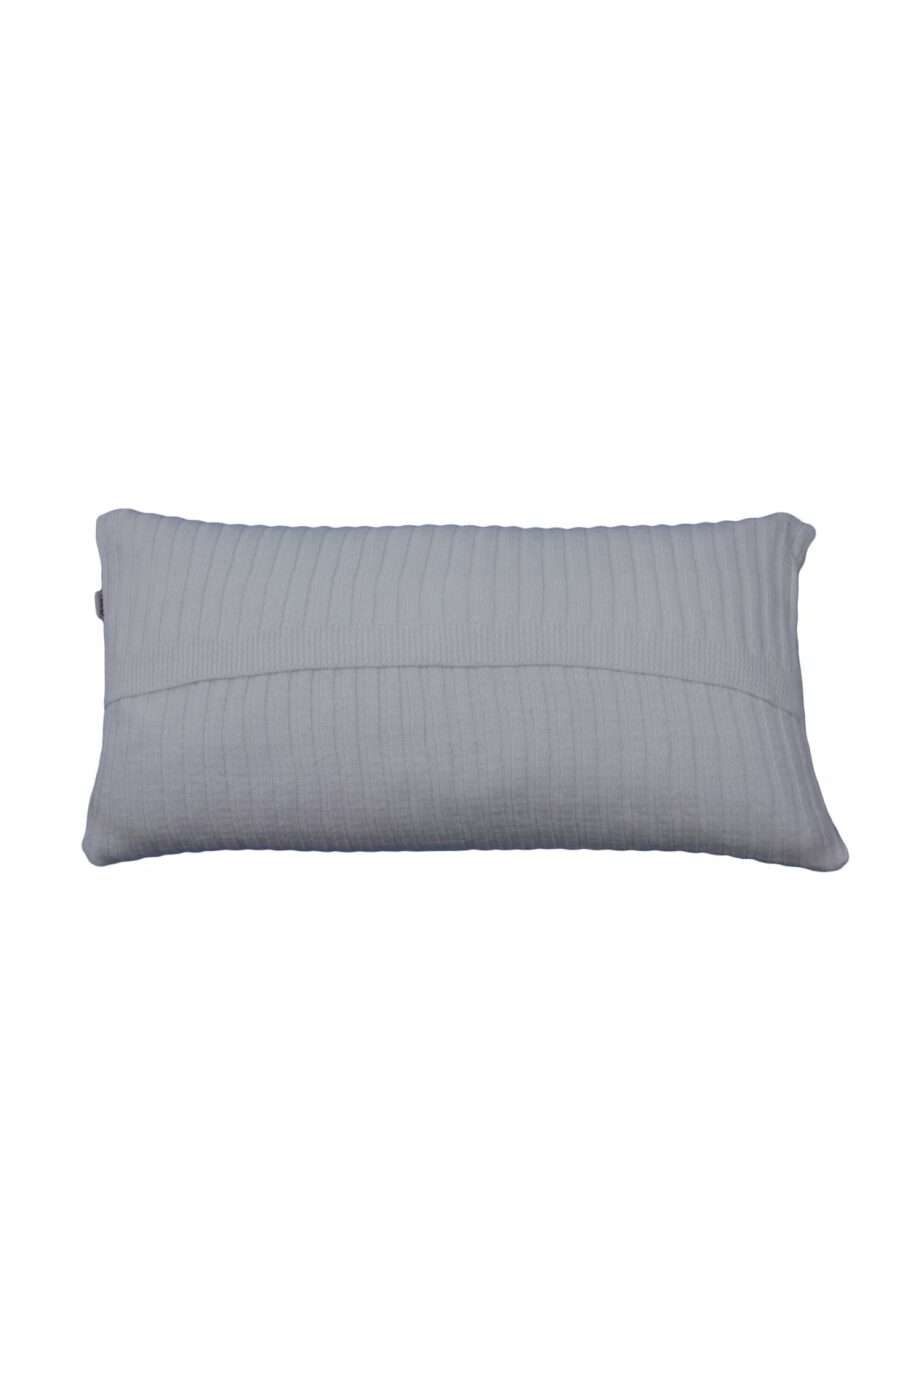 ribs small white knitted cotton pillowcase small